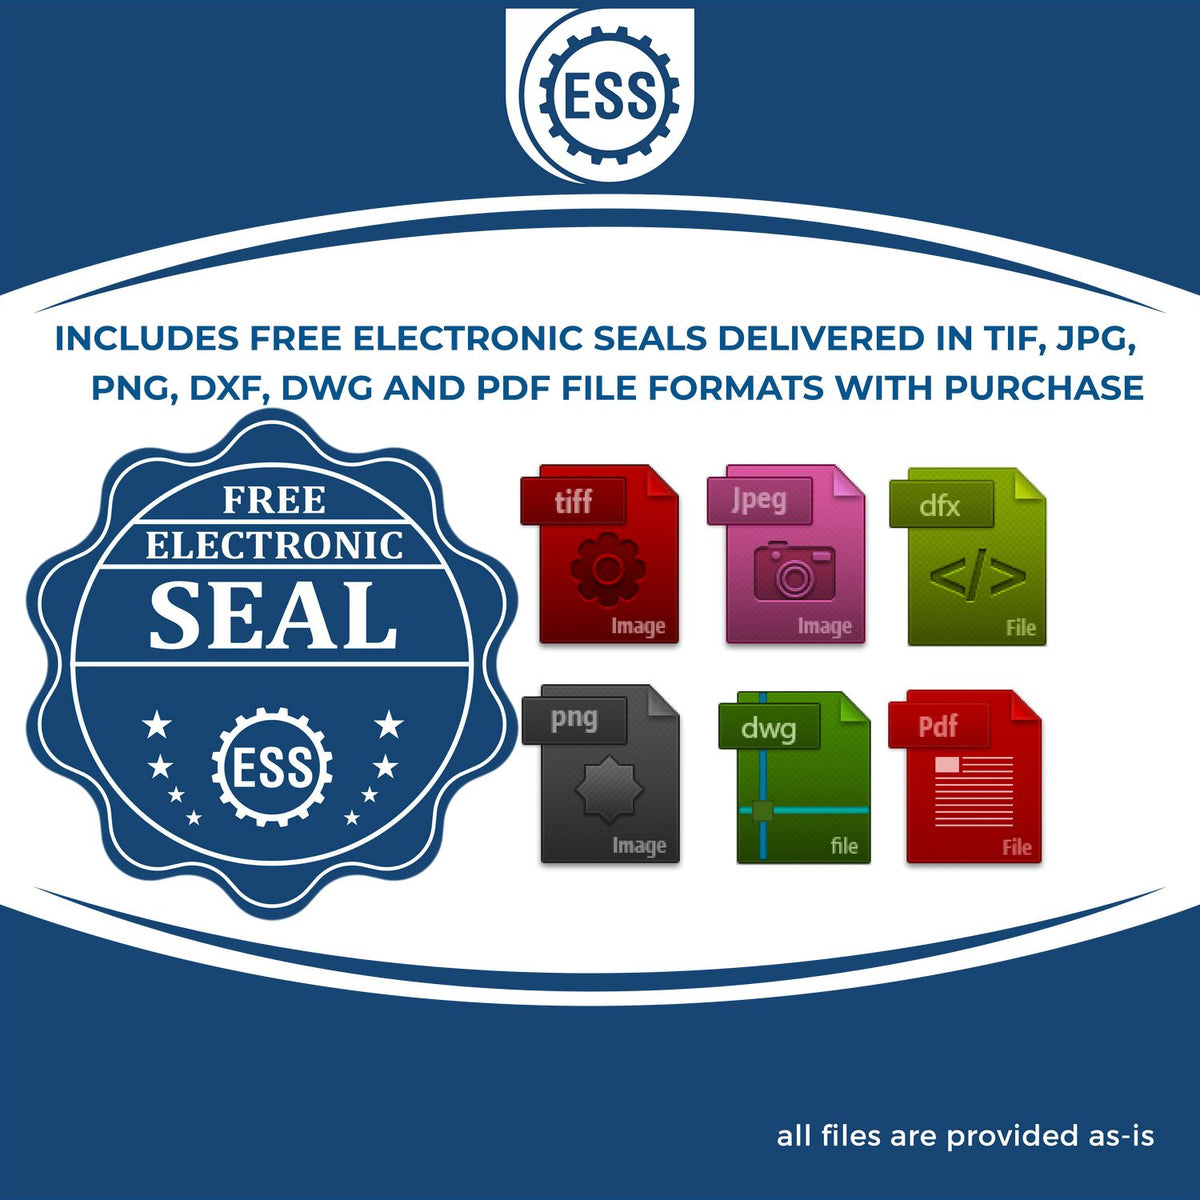 An infographic for the free electronic seal for the Nebraska Geologist Desk Seal illustrating the different file type icons such as DXF, DWG, TIF, JPG and PNG.